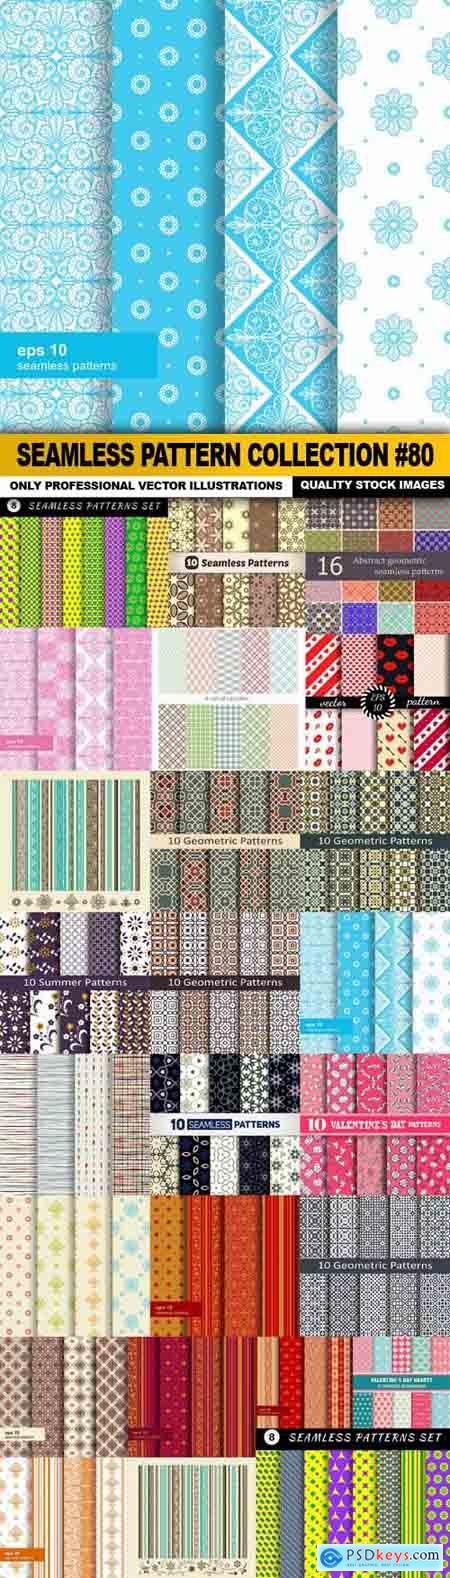 Seamless Pattern Collection #80 - 25 Vector